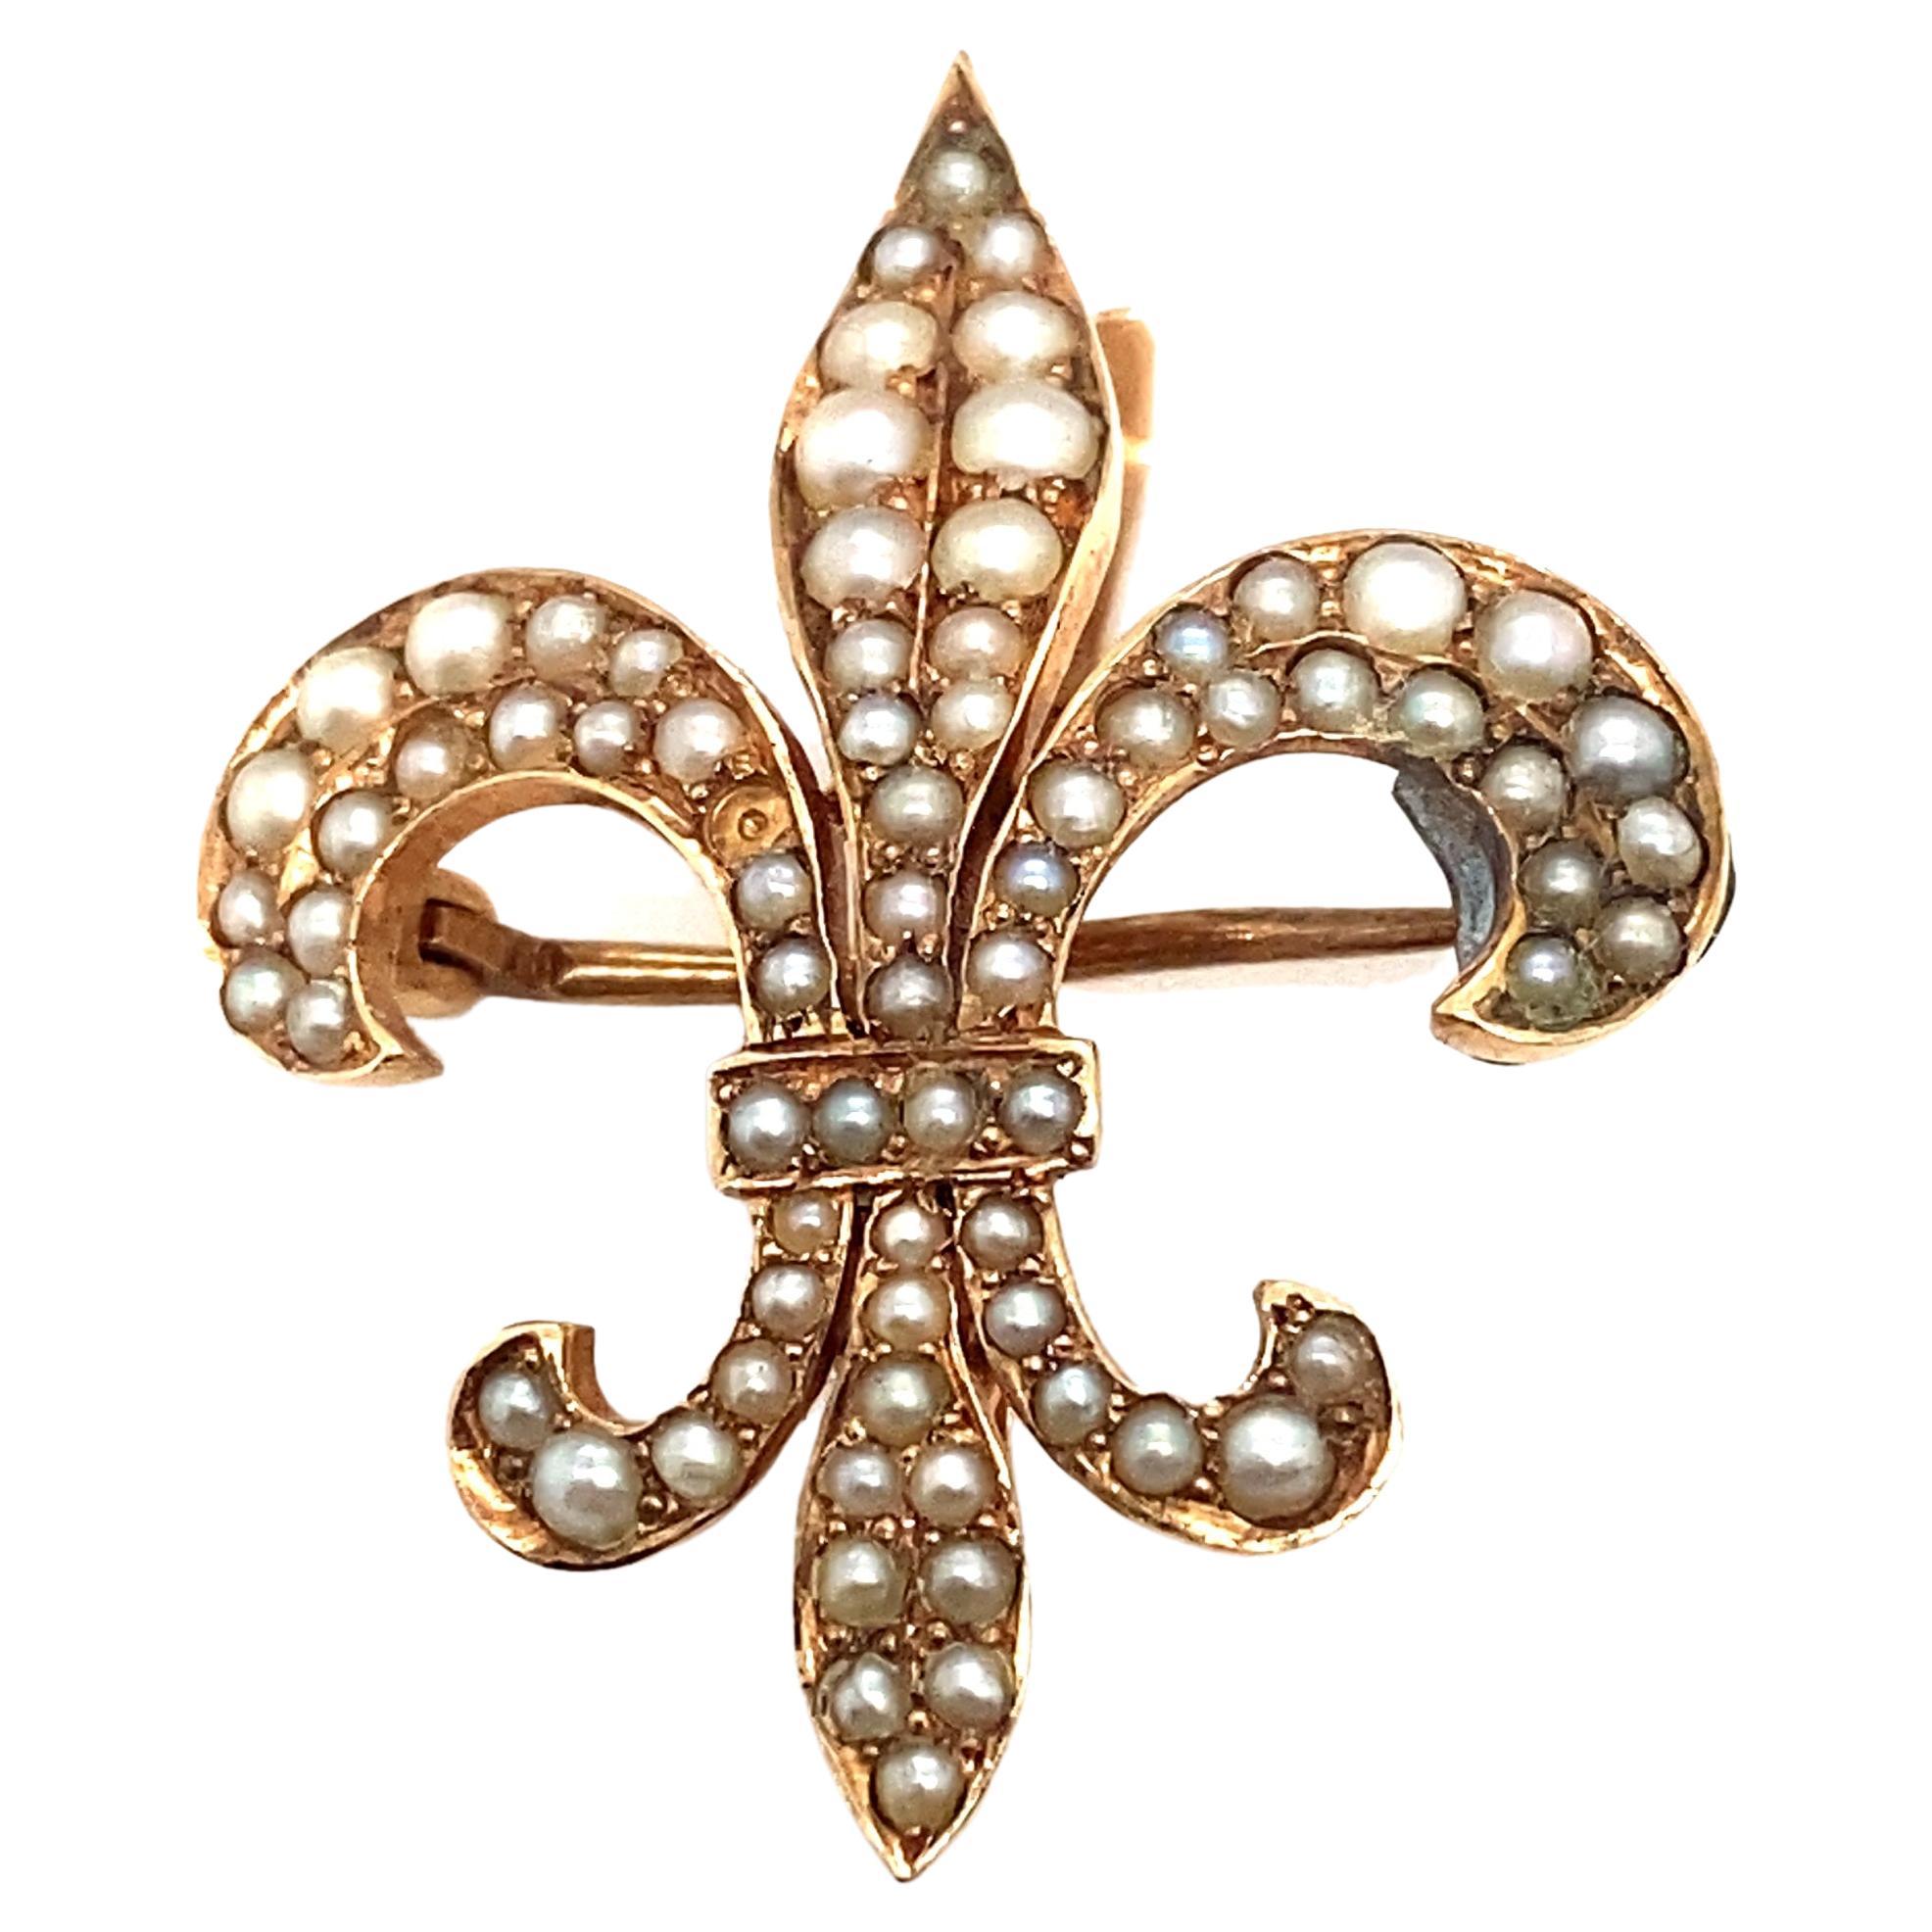 Circa 1890s French Fleur de Lis Seed Pearl Brooch in 14 Karat Yellow Gold For Sale